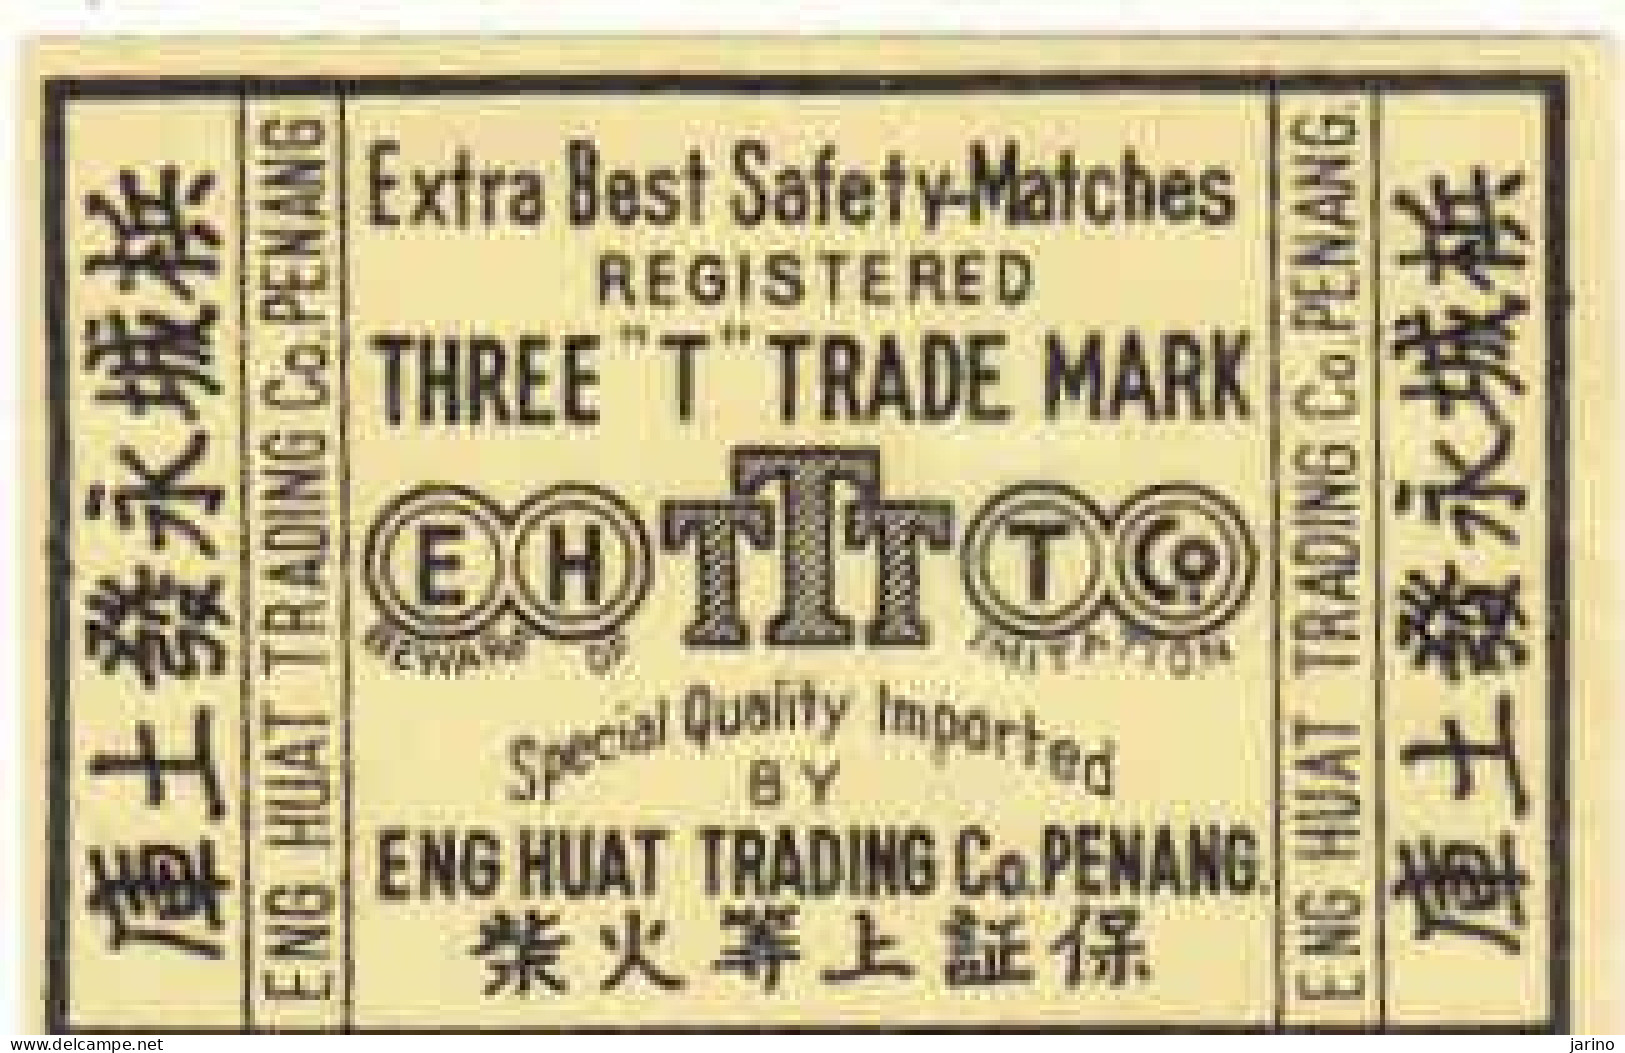 Japan - Matchbox Label, Special Quality Imported Eng Huat Trading Co. Penang - Malaysia - Zündholzschachteletiketten